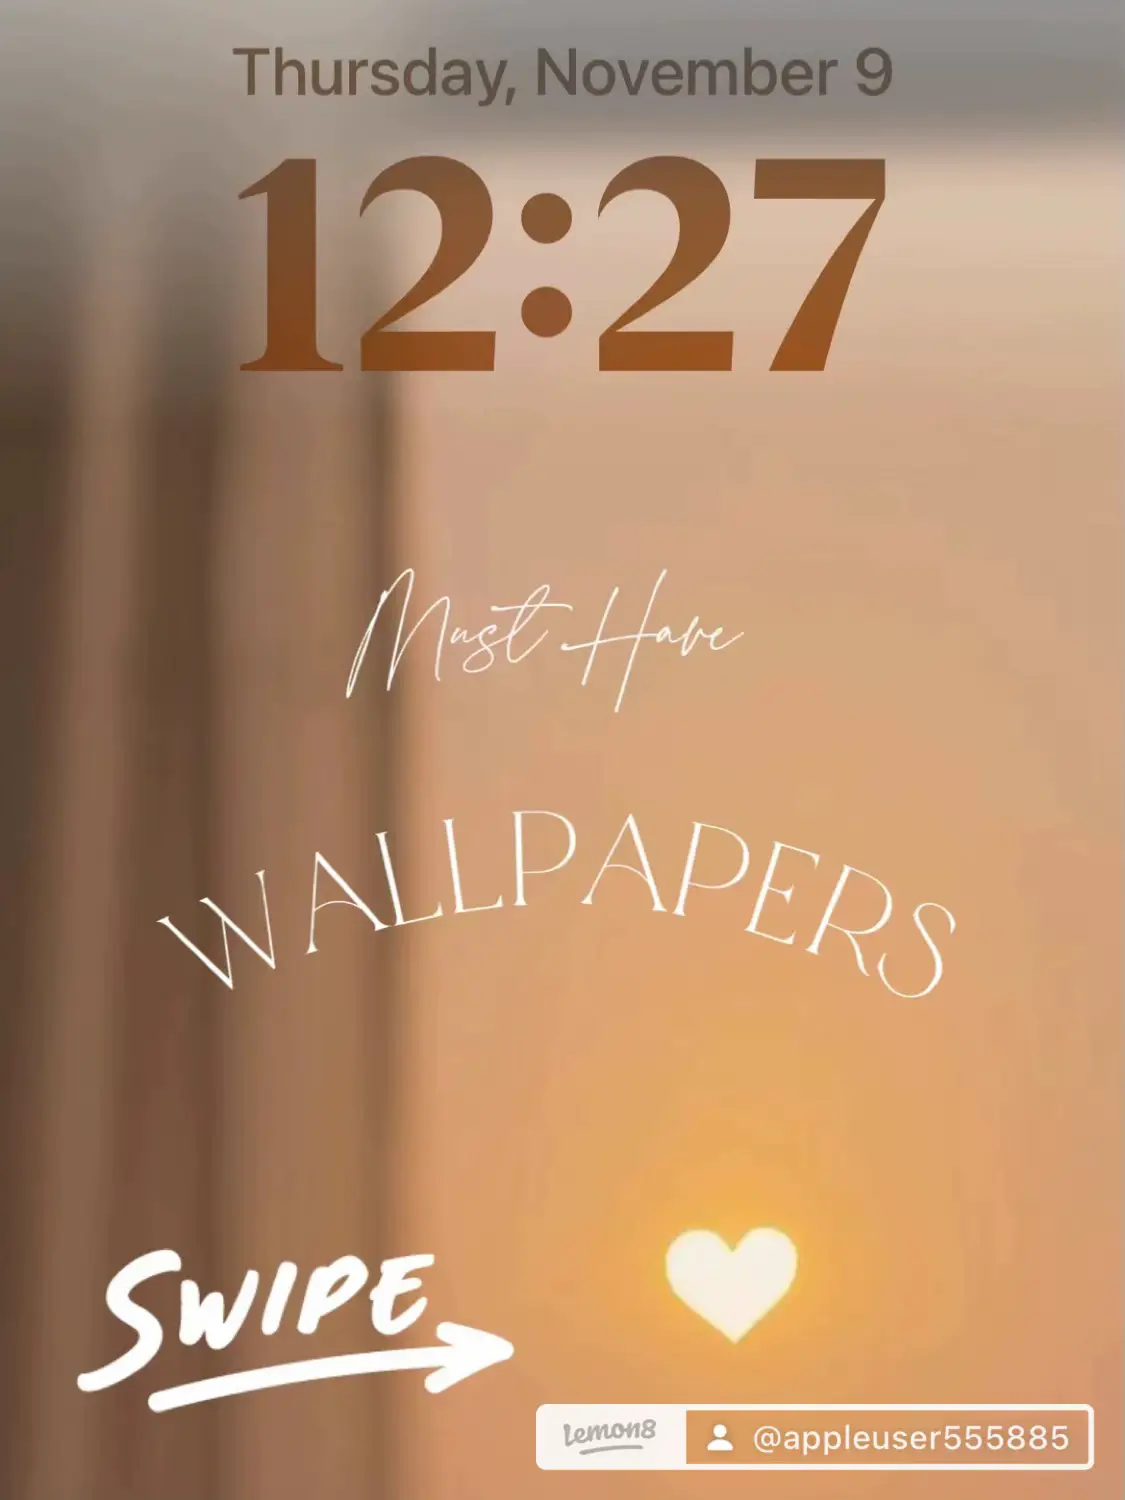  A phone screen displaying a time of 11:21.